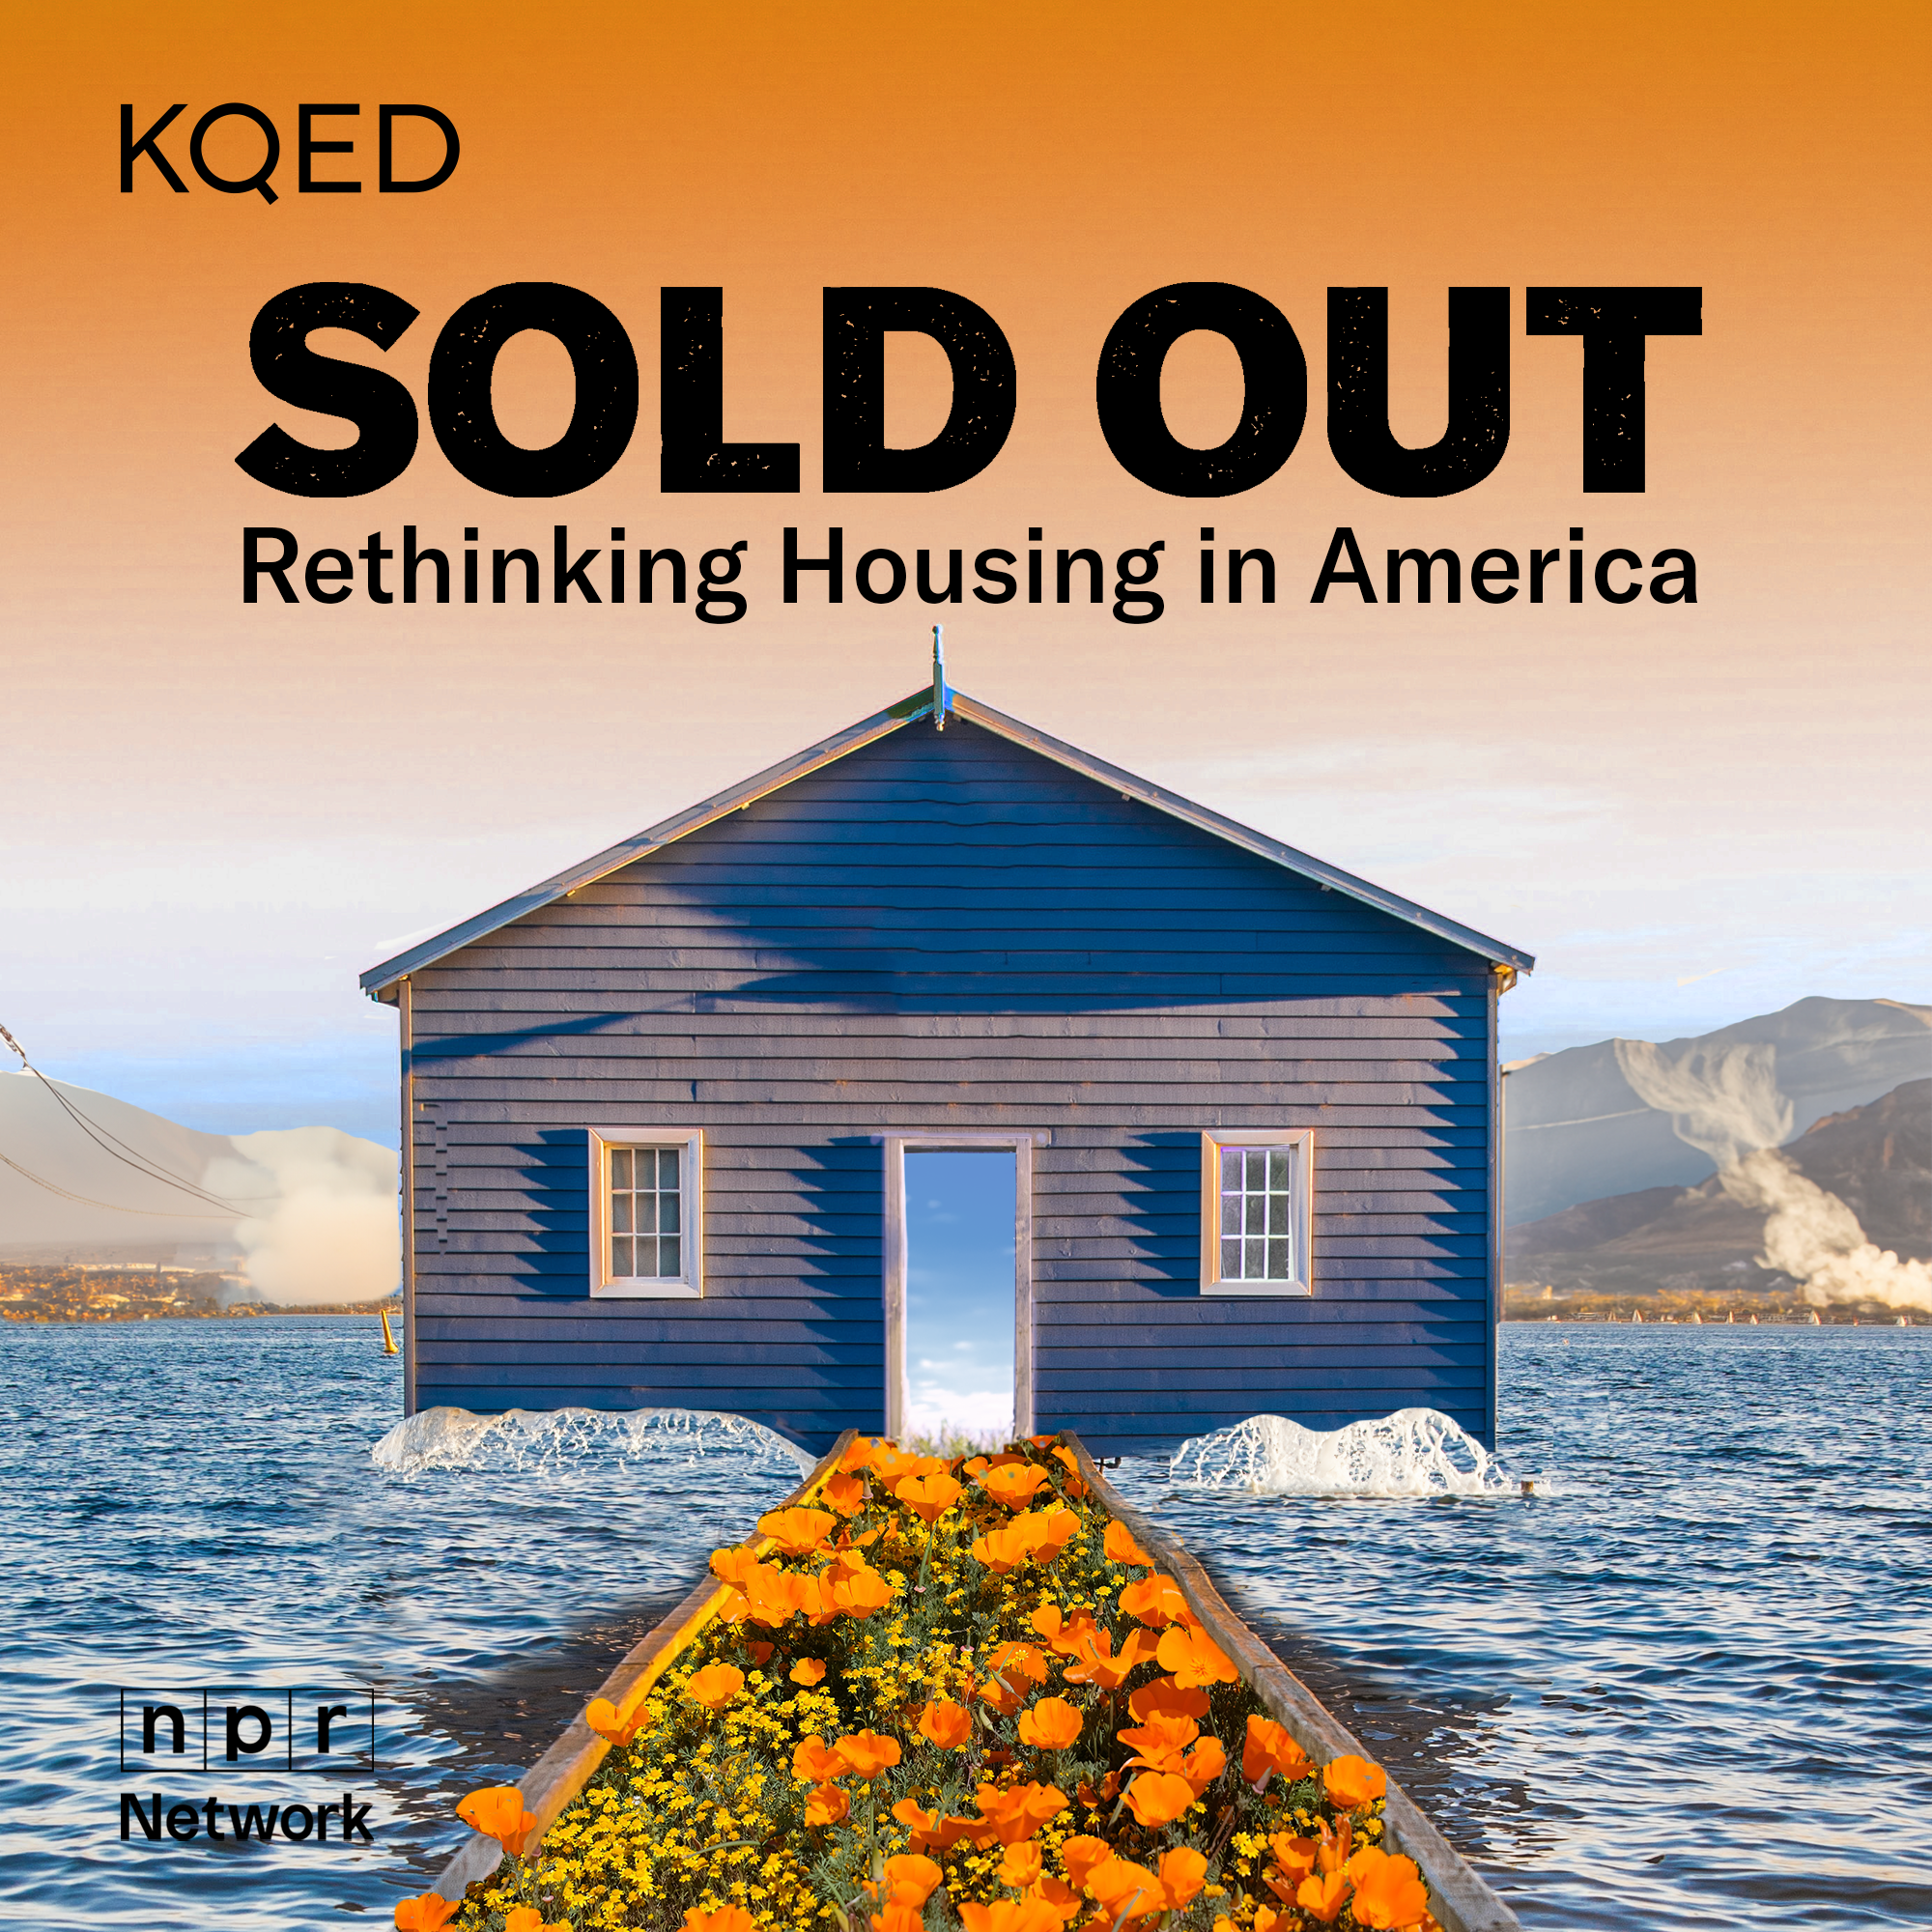 KQED Sold Out: Rethinking Housing in America